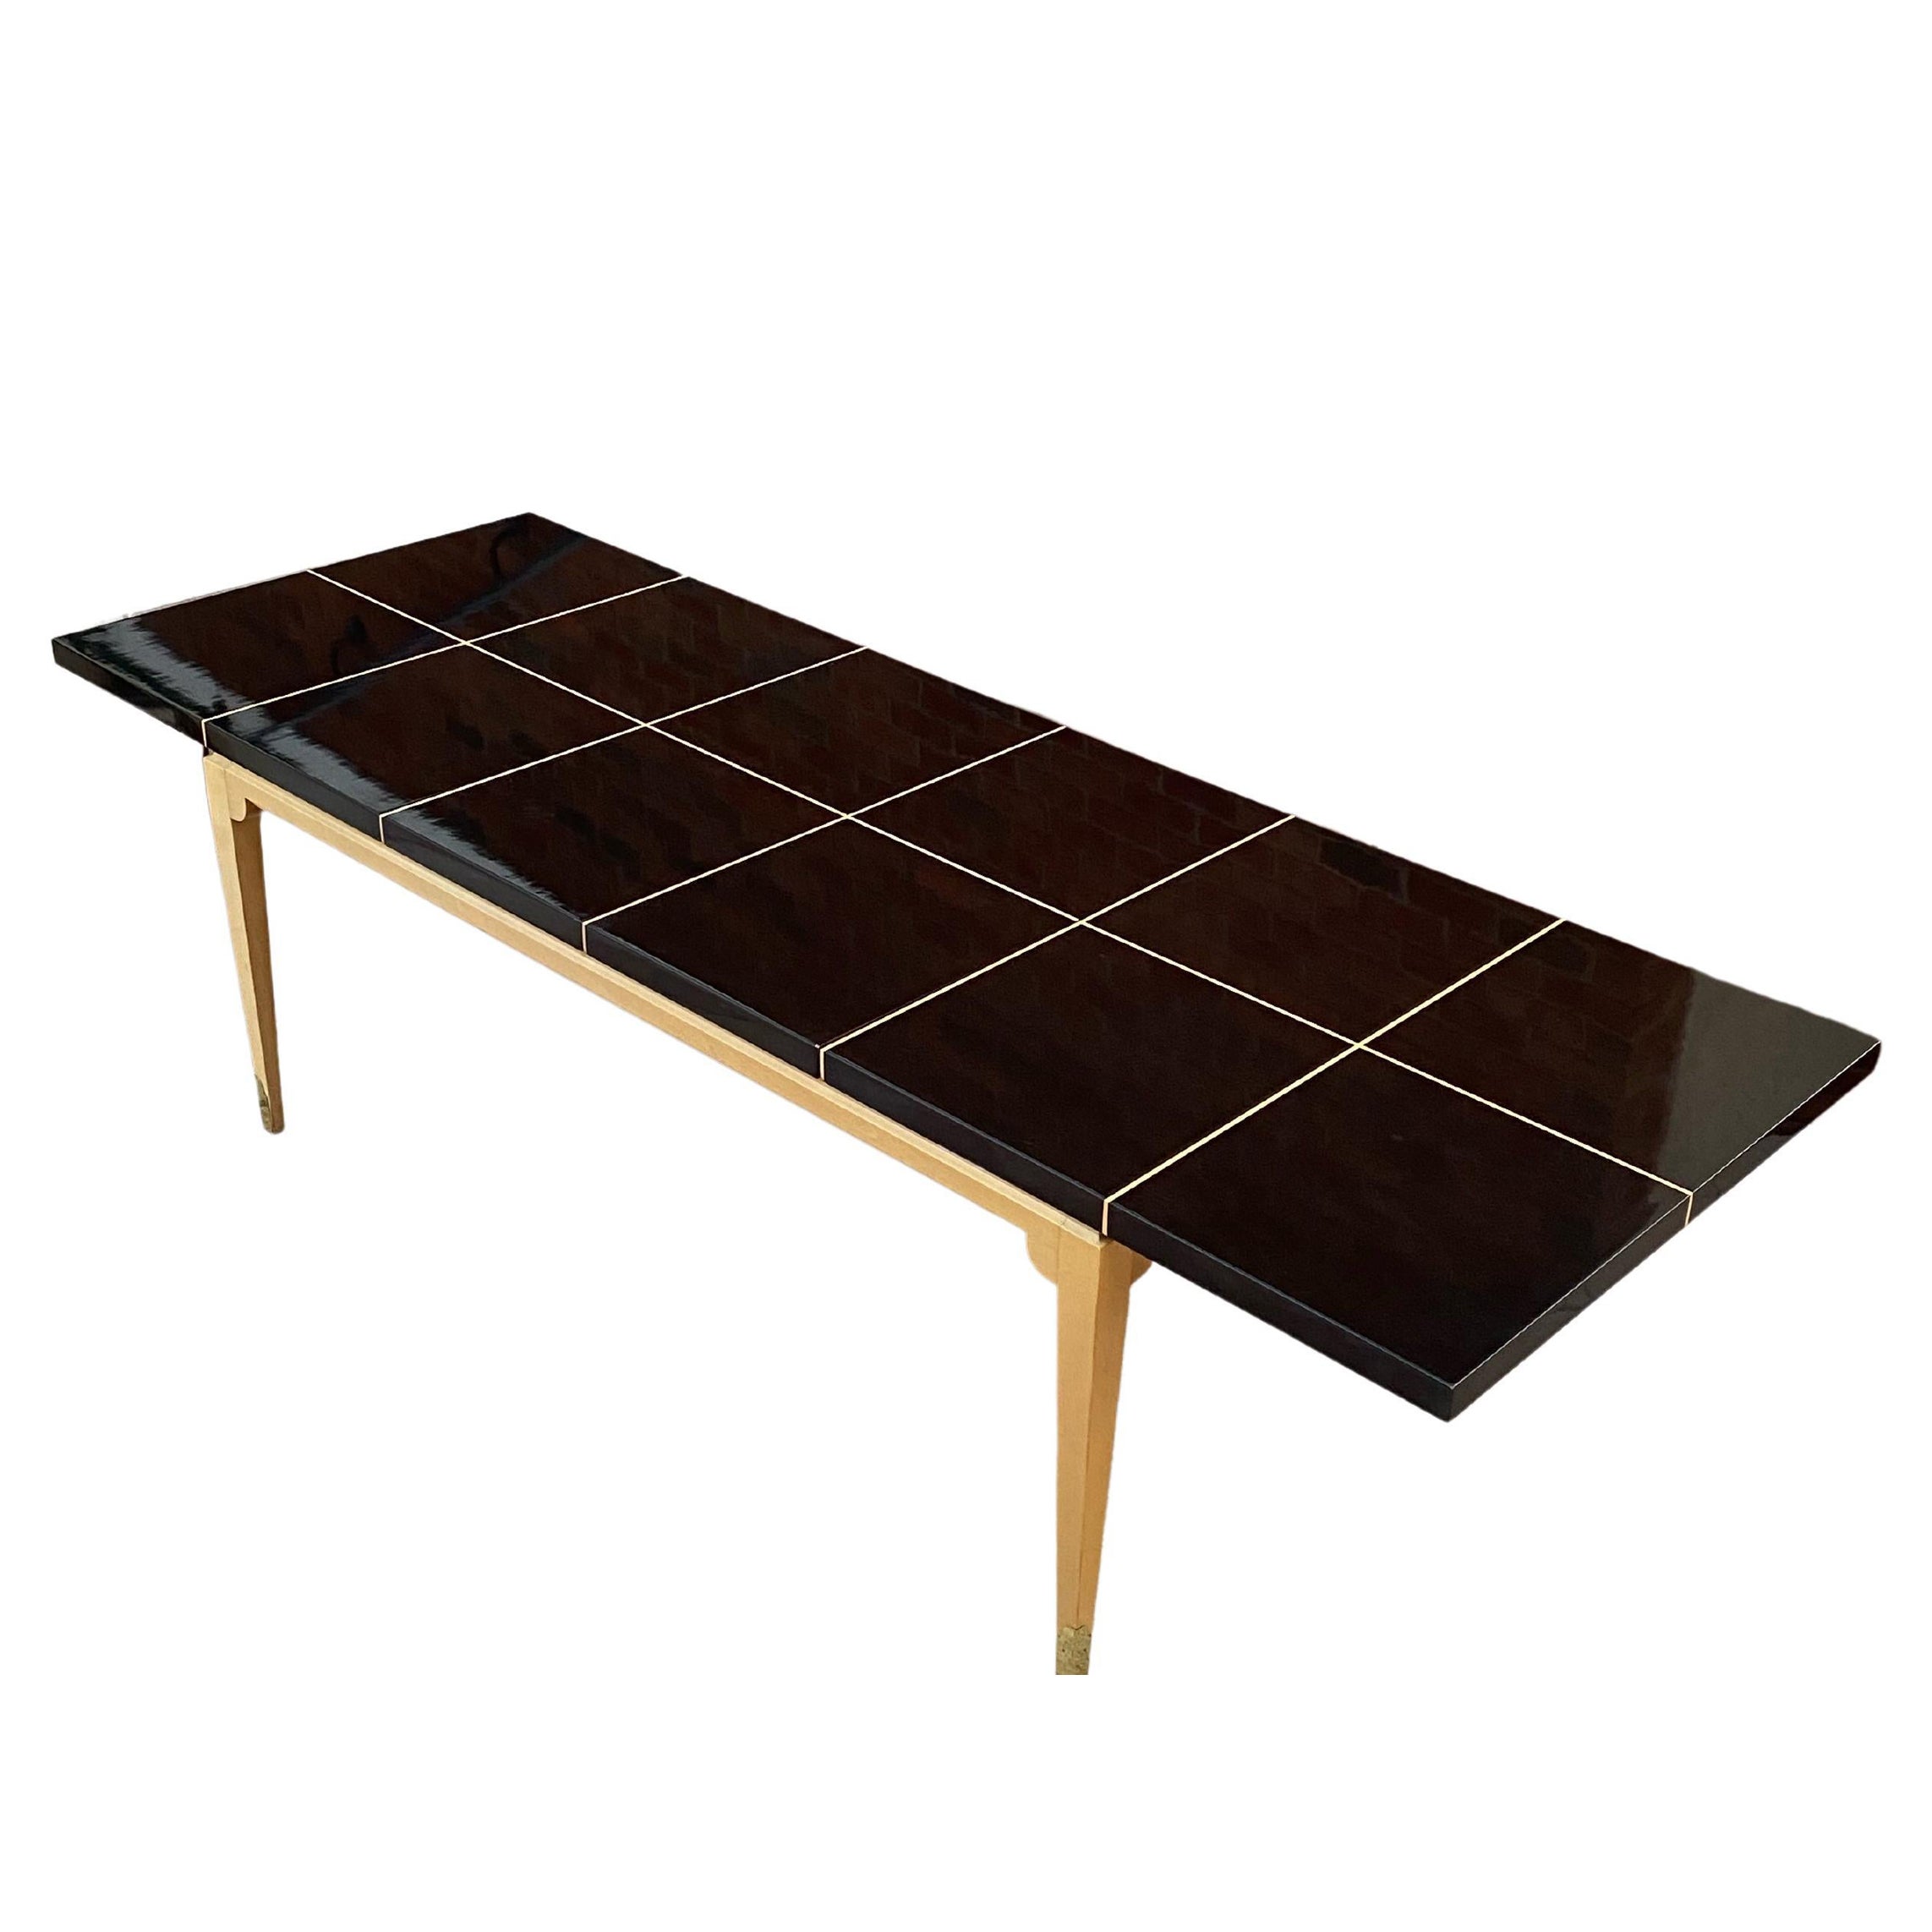 Sleek Parzinger Mid-Century Modern Laquered Mahogany & Maple Dining Table For Sale